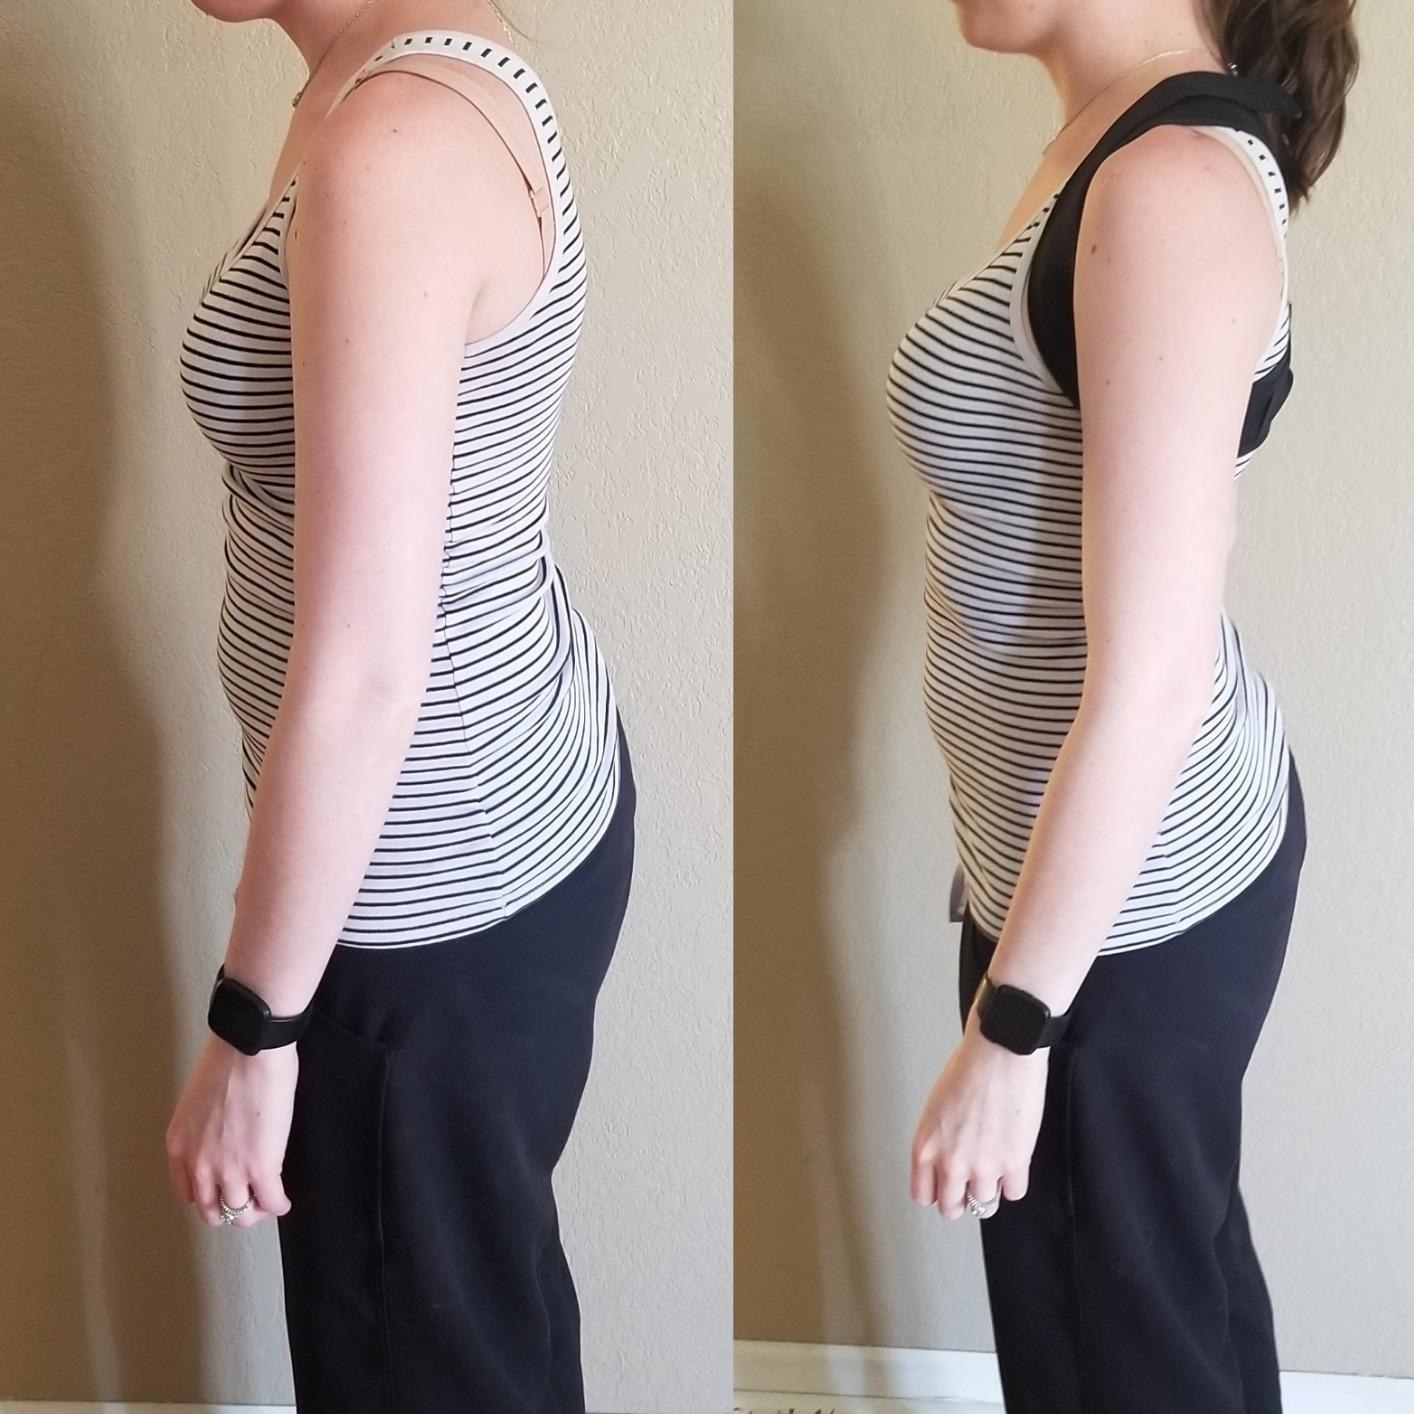 A before and after reviewer photo showing a profile view of an individual standing and another photo of the same individual wearing the posture corrector with their shoulders pulled back 